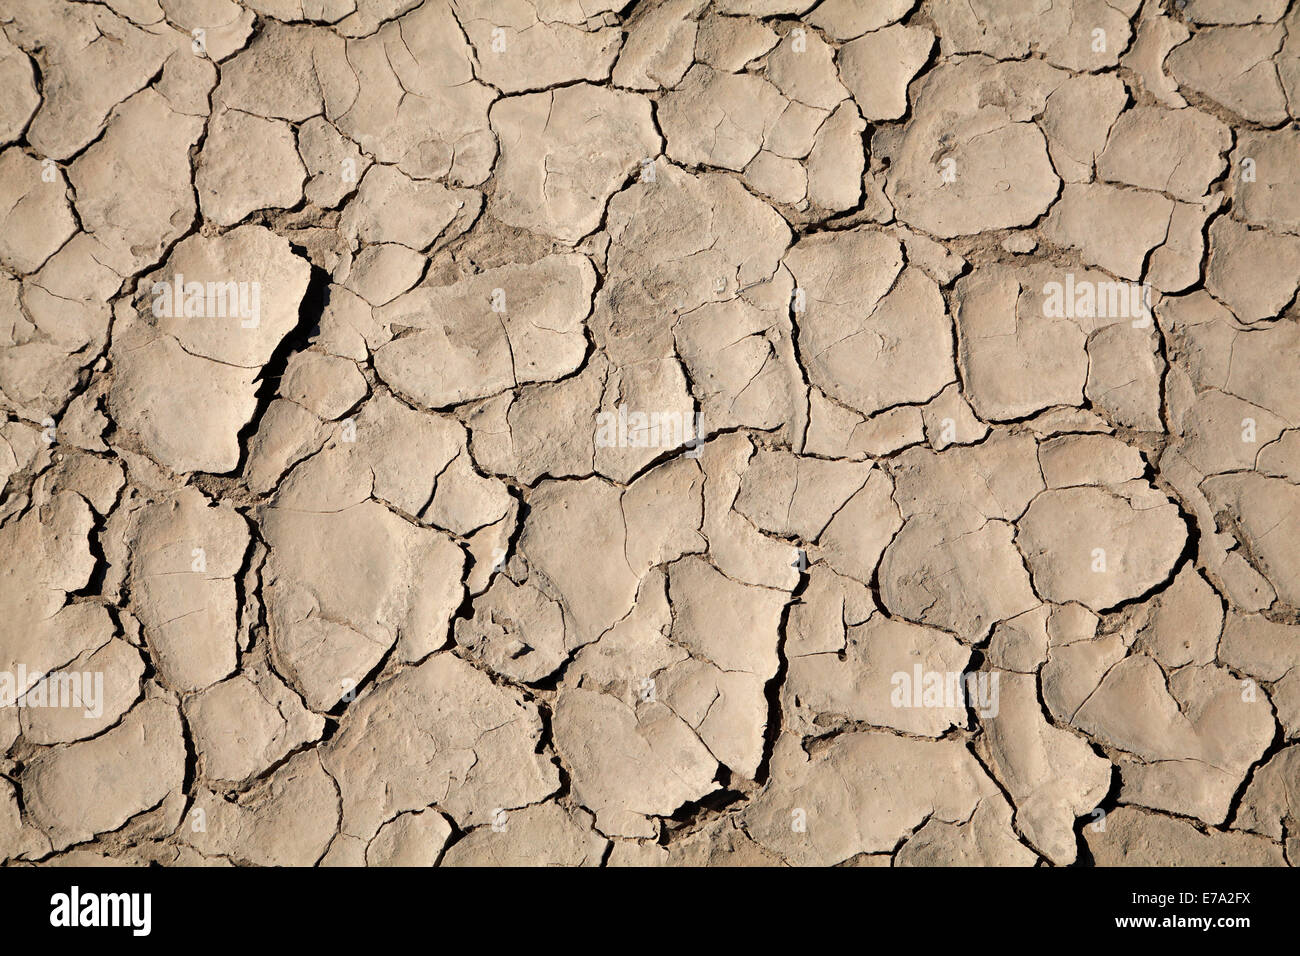 Dried mud on salt Pan, Panamint Valley, Death Valley National Park, Mojave Desert, California, USA Stock Photo